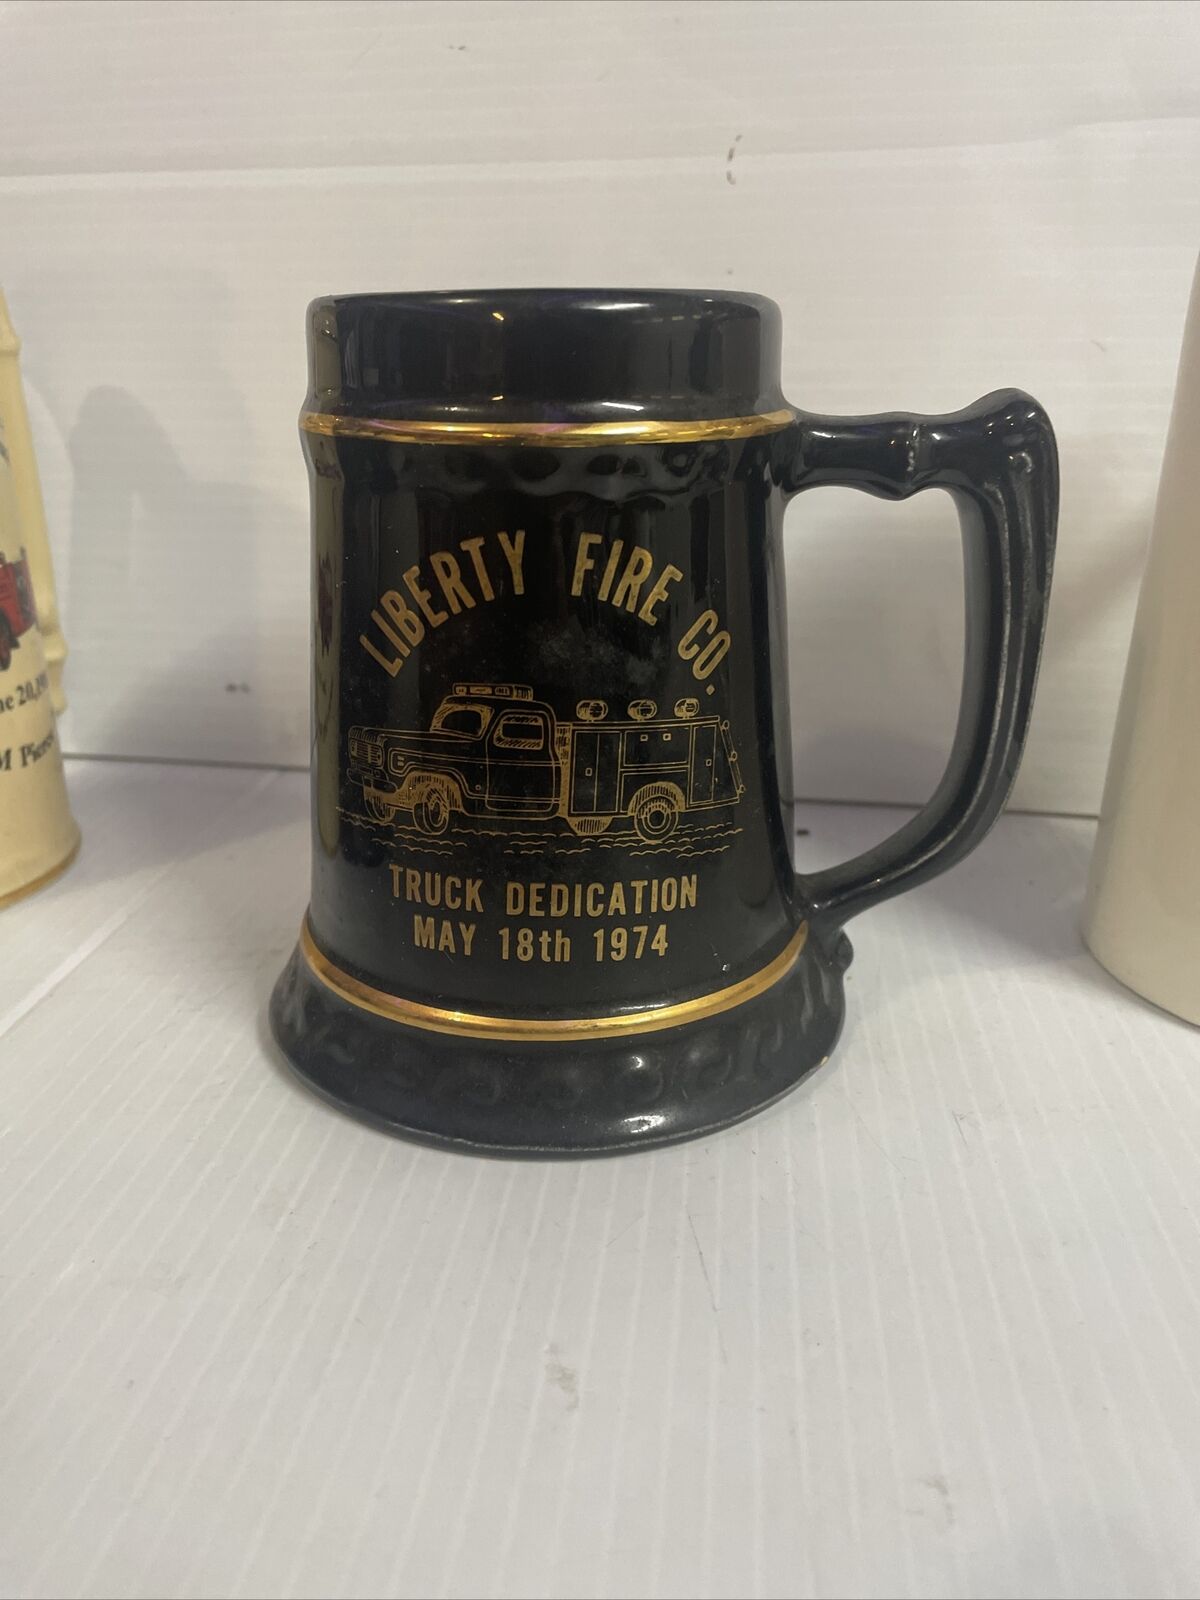 Vintage Liberty Fire Co. Truck Dedication May 18th 1974 Cup Mug Beer Stein